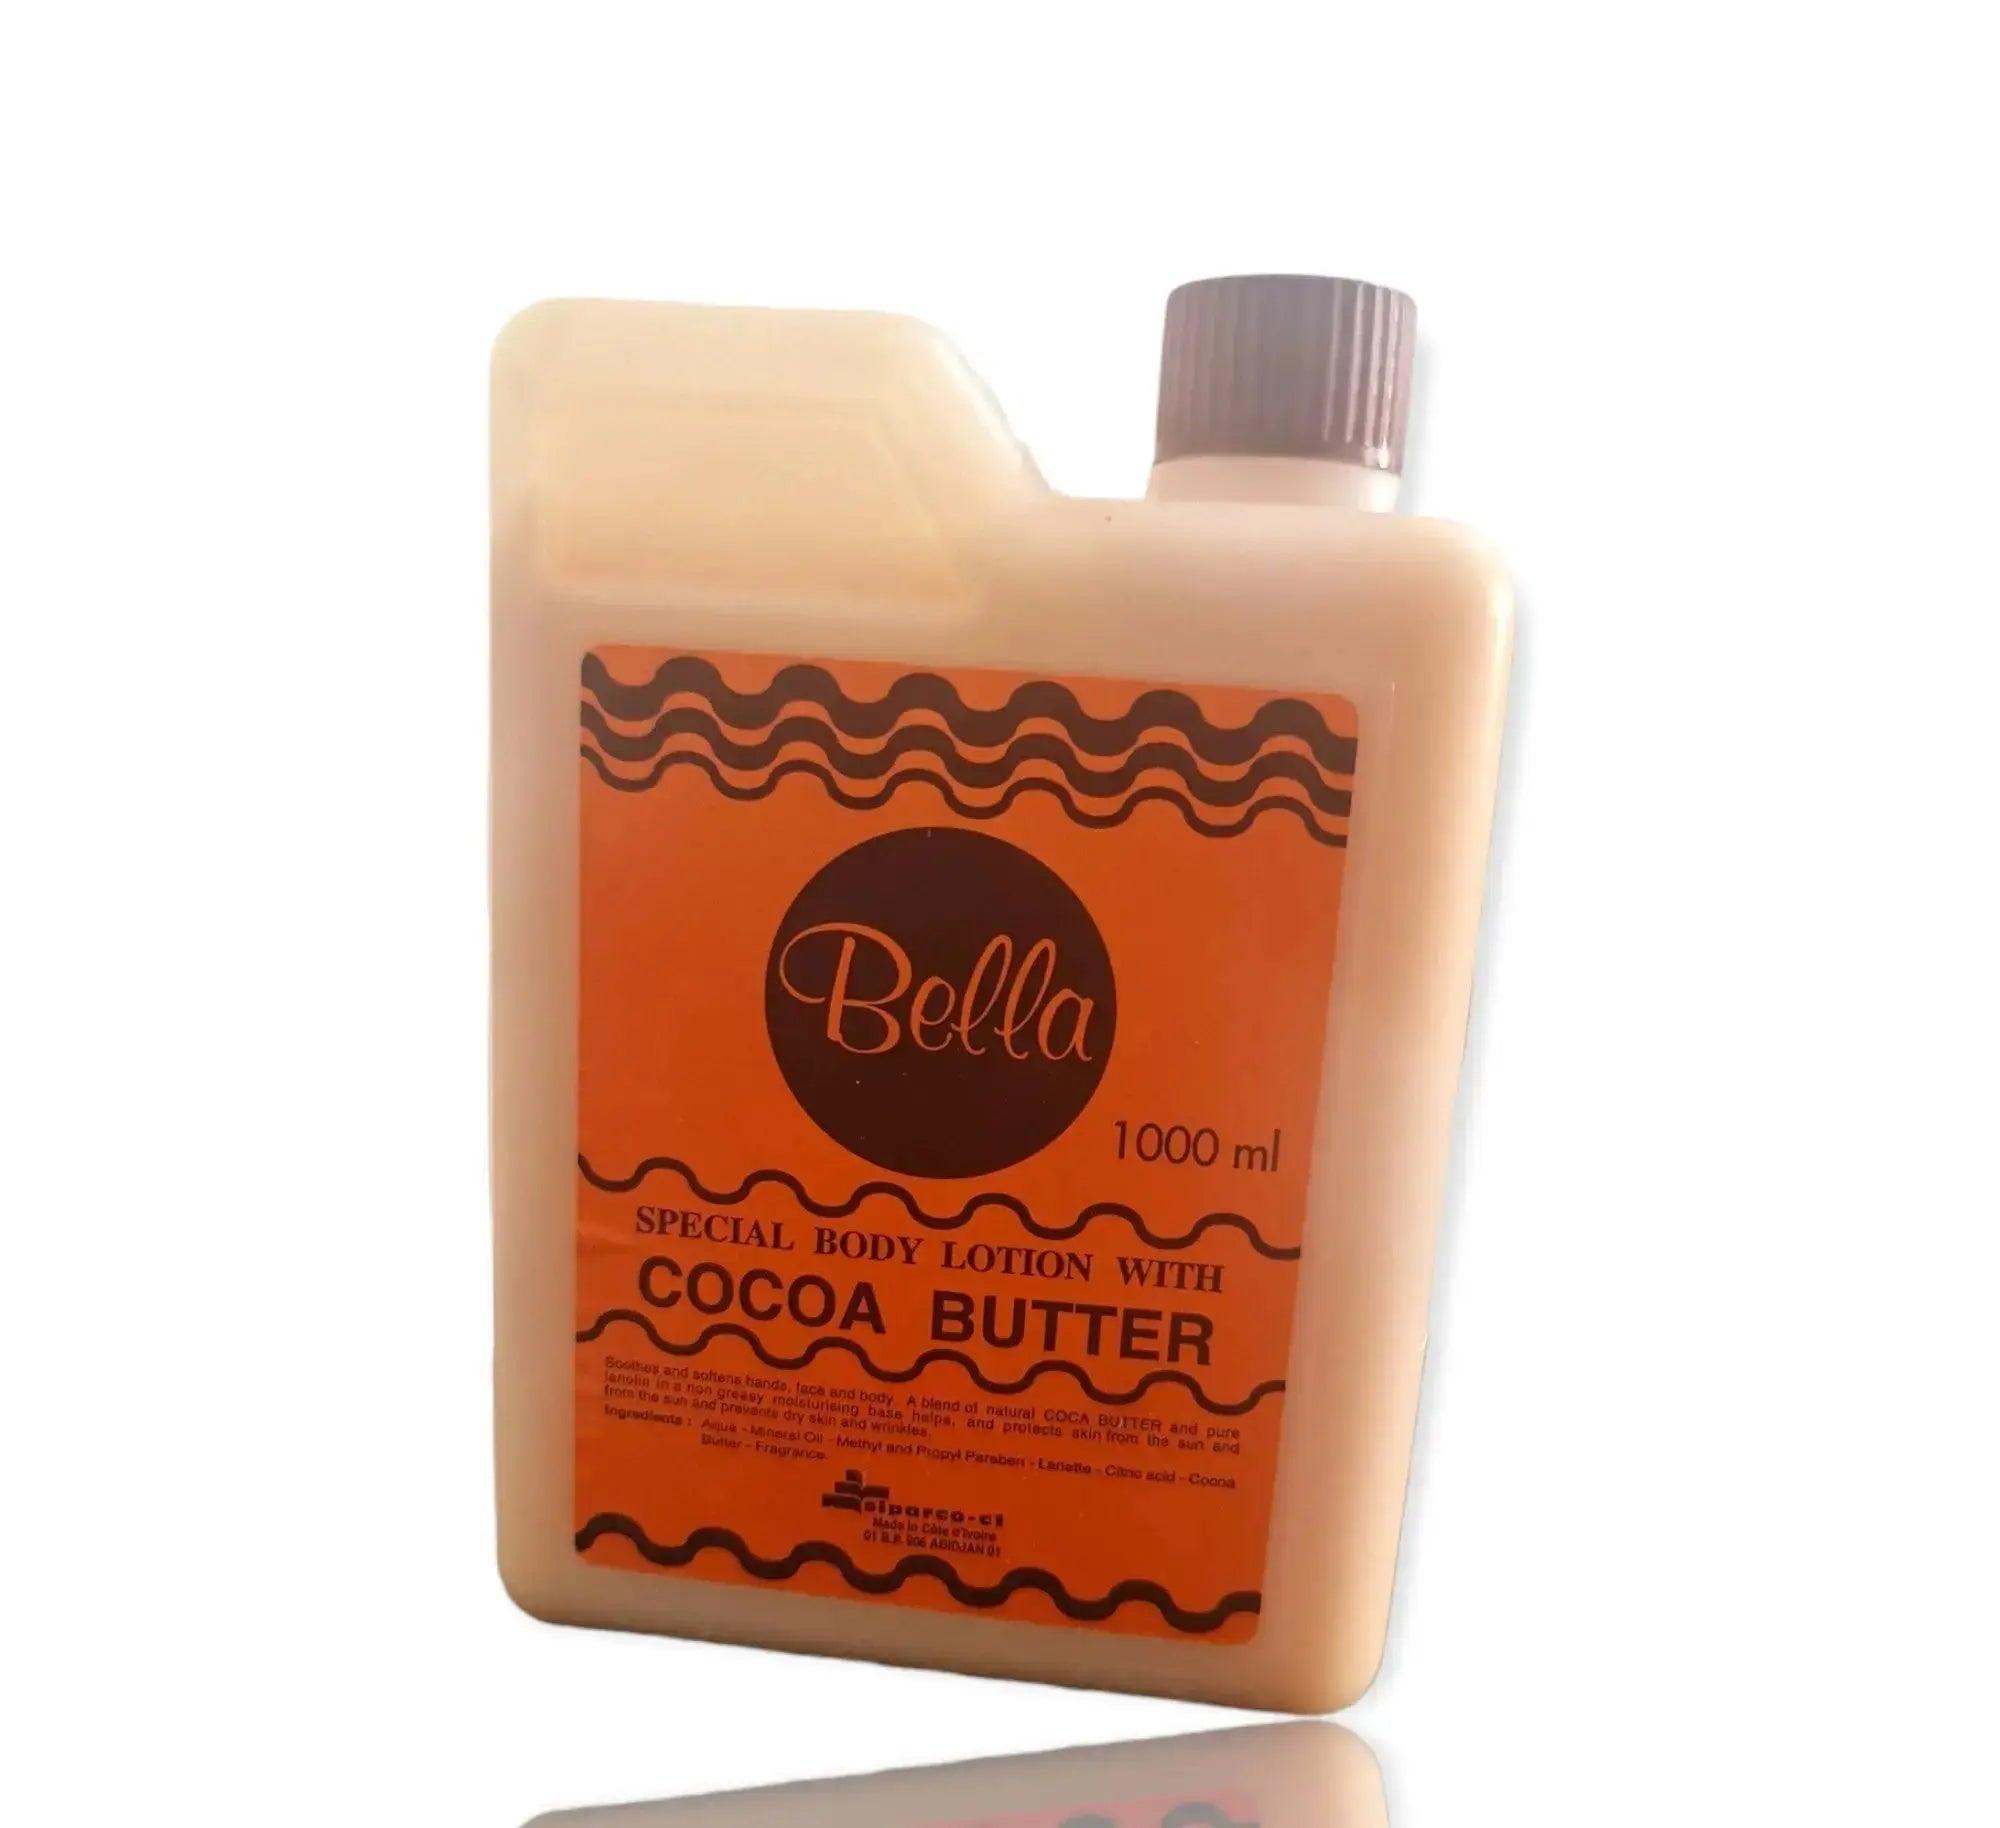 Cocoa Butter Body Lotion - BELLA Special Body Lotion with Cocoa Butter 1000 ml - Honesty Sales U.K